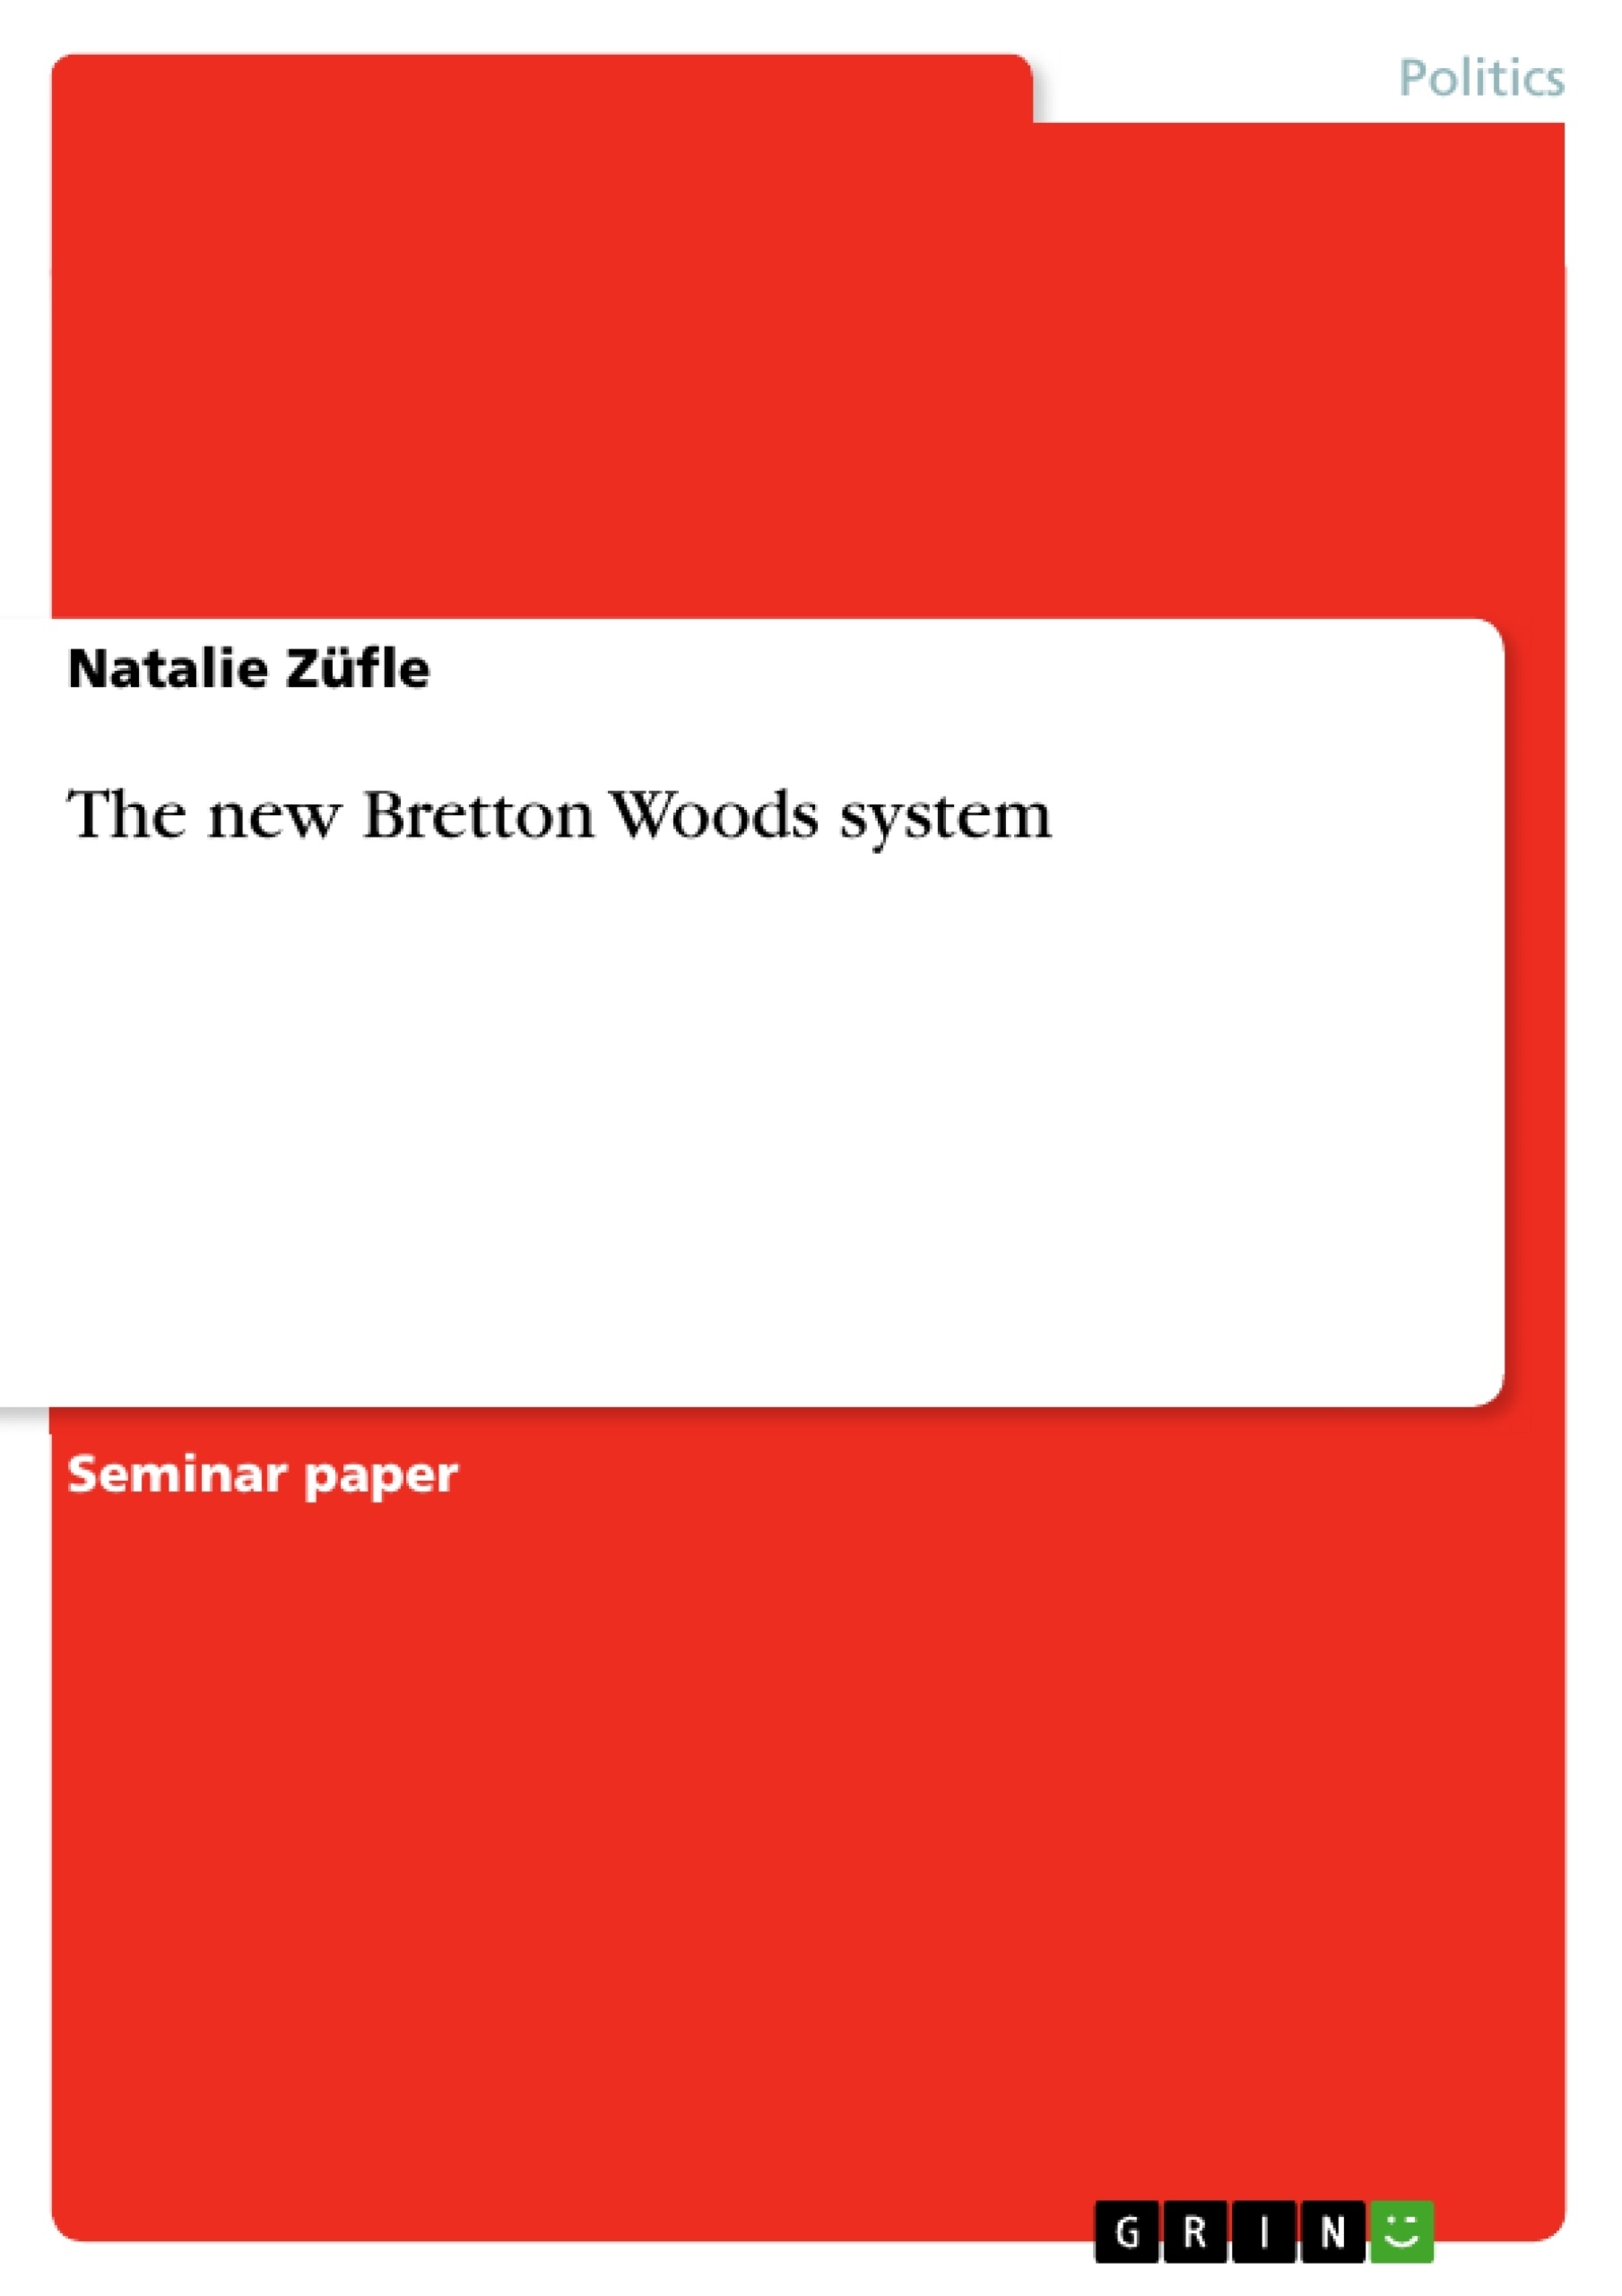 Title: The new Bretton Woods system